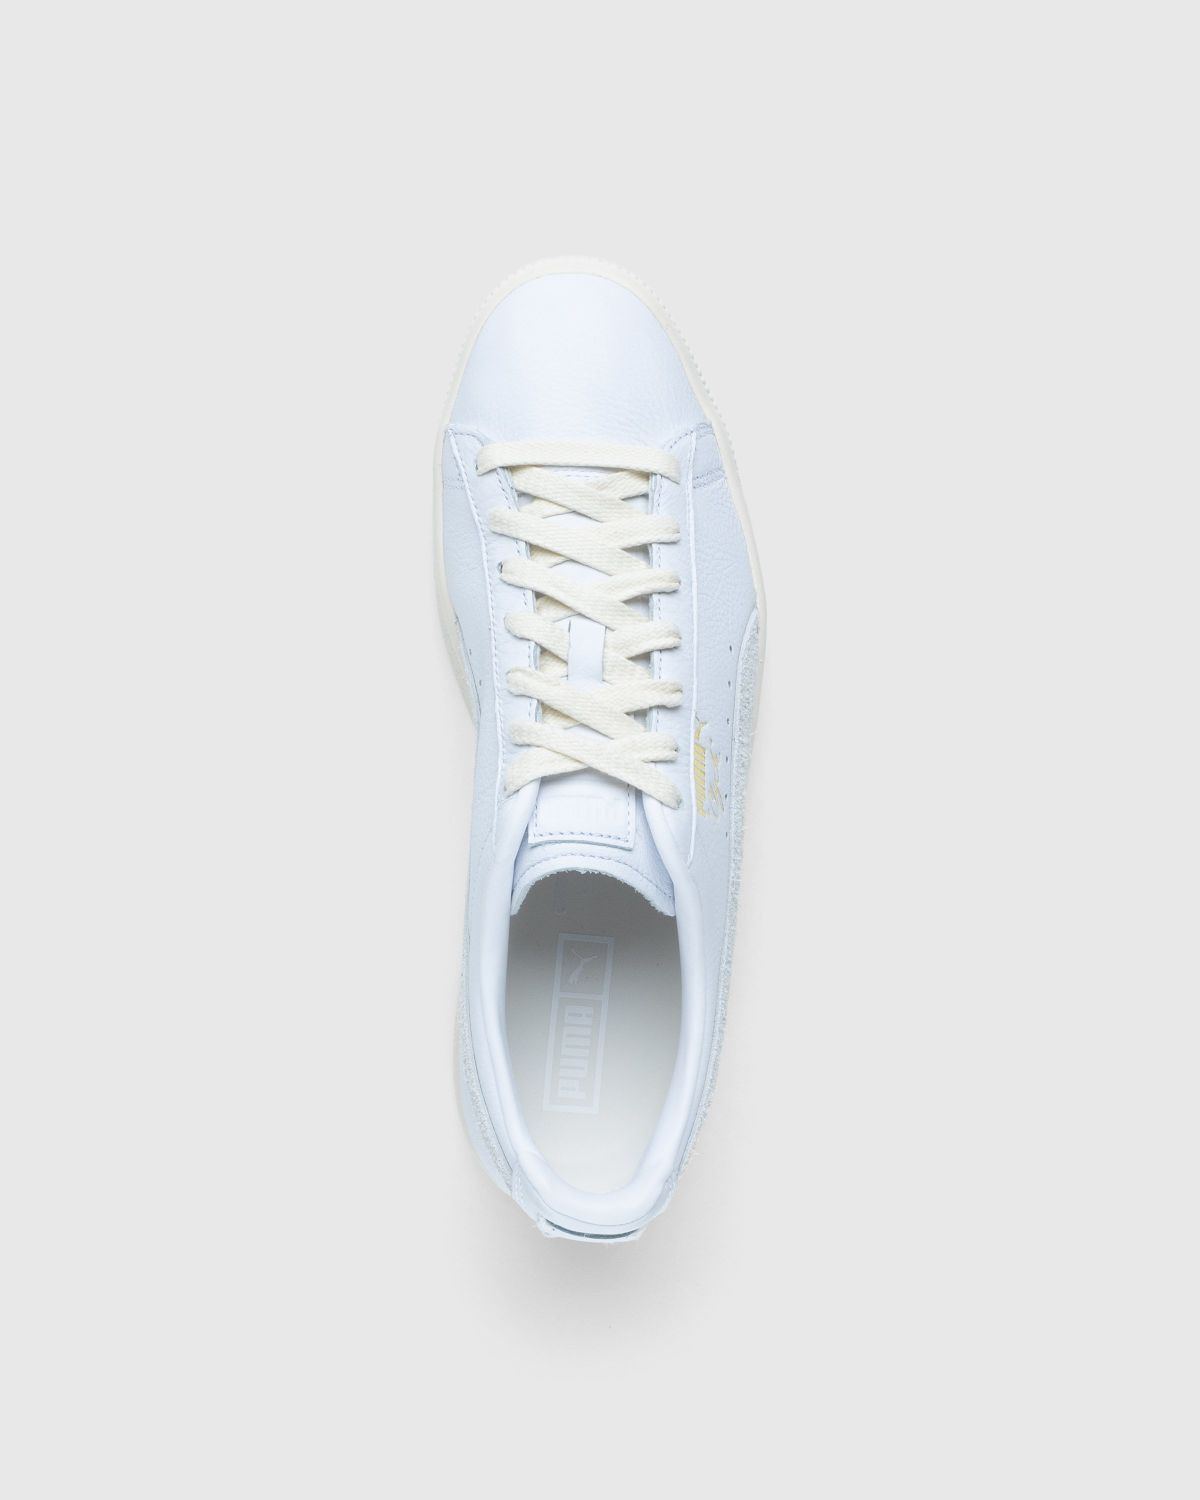 Puma – Clyde Base White - Sneakers - White - Image 5